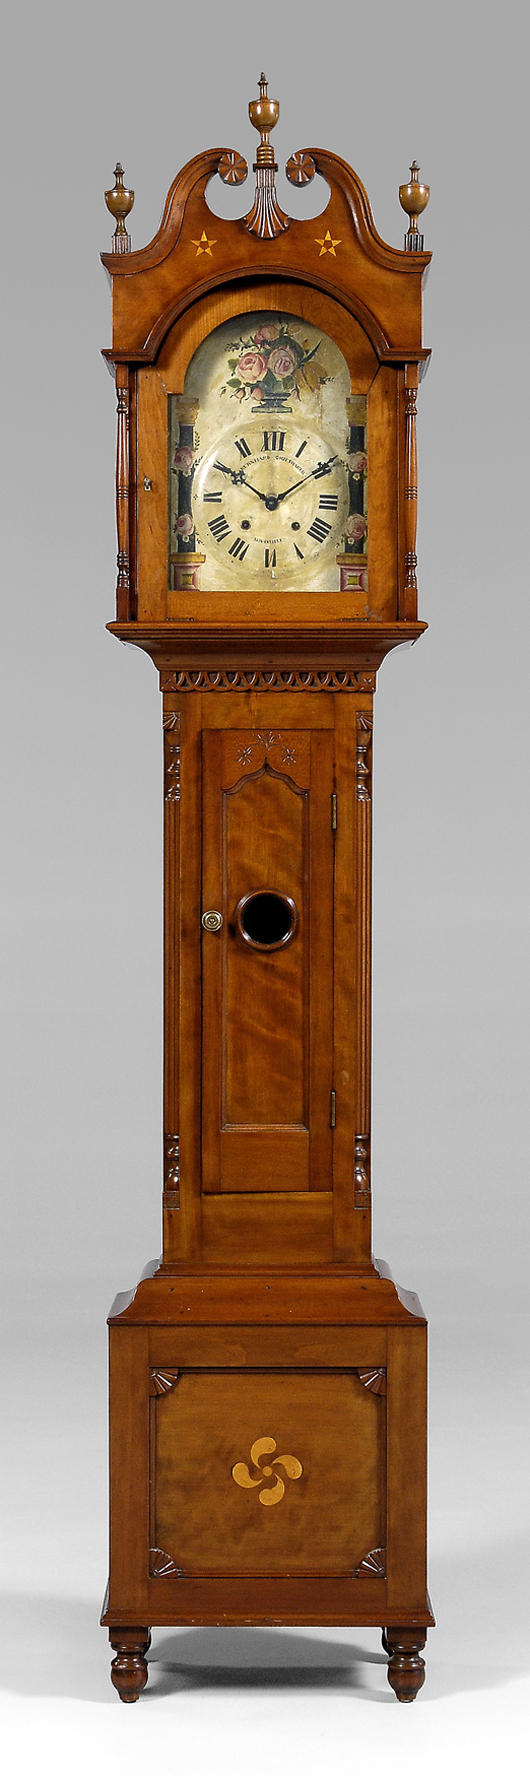 From the top, note the shell-carved finial plinth, elaborately decorated waisted case, central bull’s-eye window and turned feet on this elegant early 19th-century Kentucky tall case clock. It has a $10,000-$20,000 estimate.